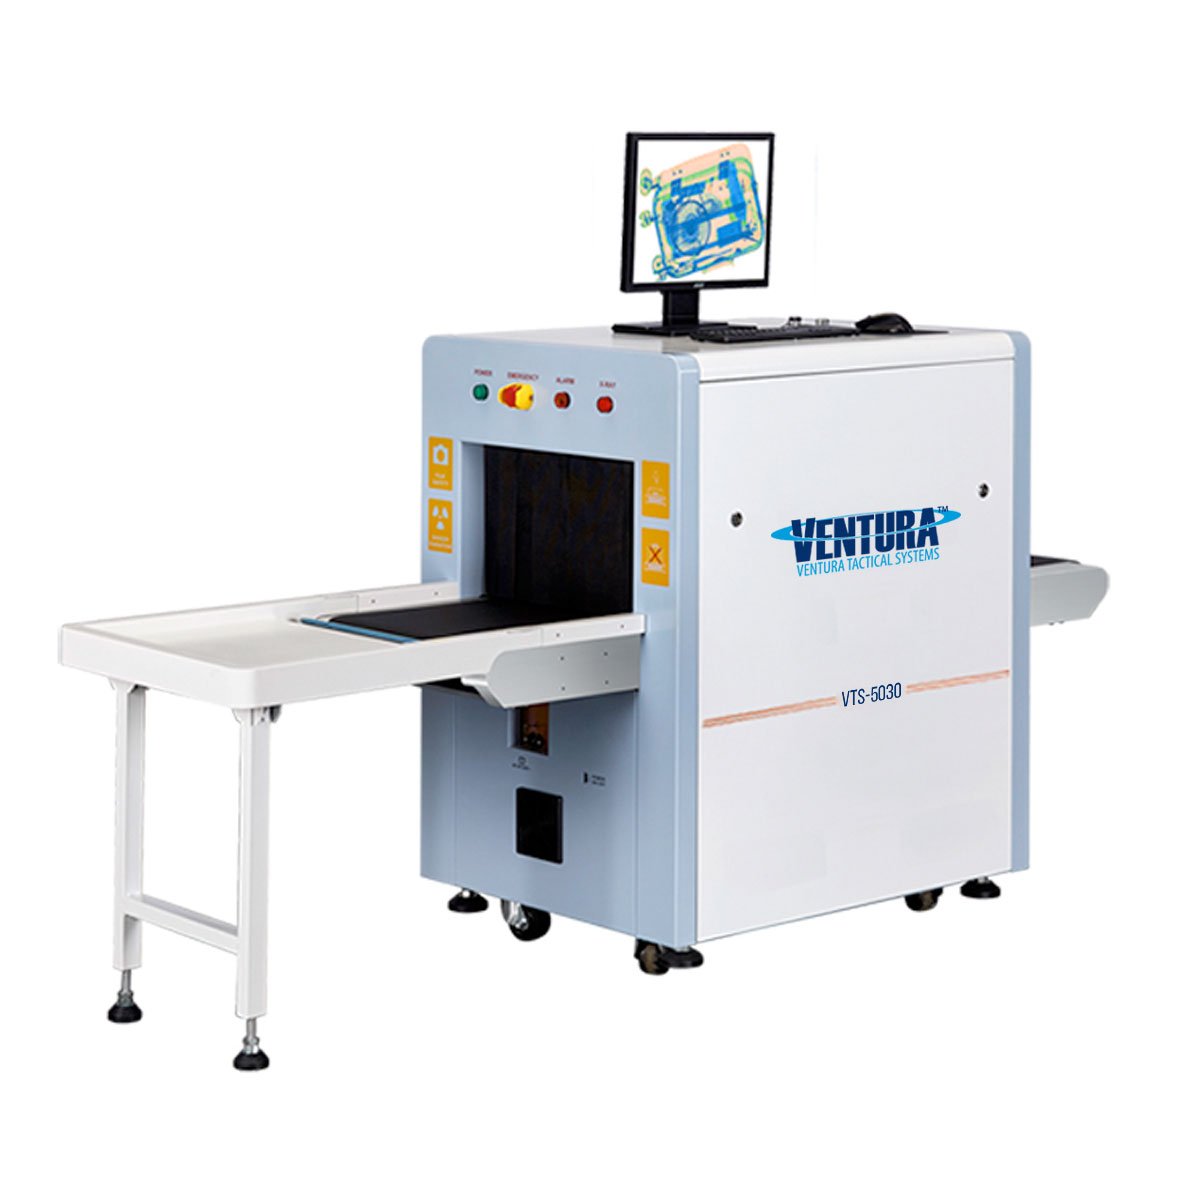 Ventura VTS-5030 X-ray Baggage Scanner Baggage and Parcel Xray Ventura Tactical Systems Tactical Gear Supplier Tactical Distributors Australia